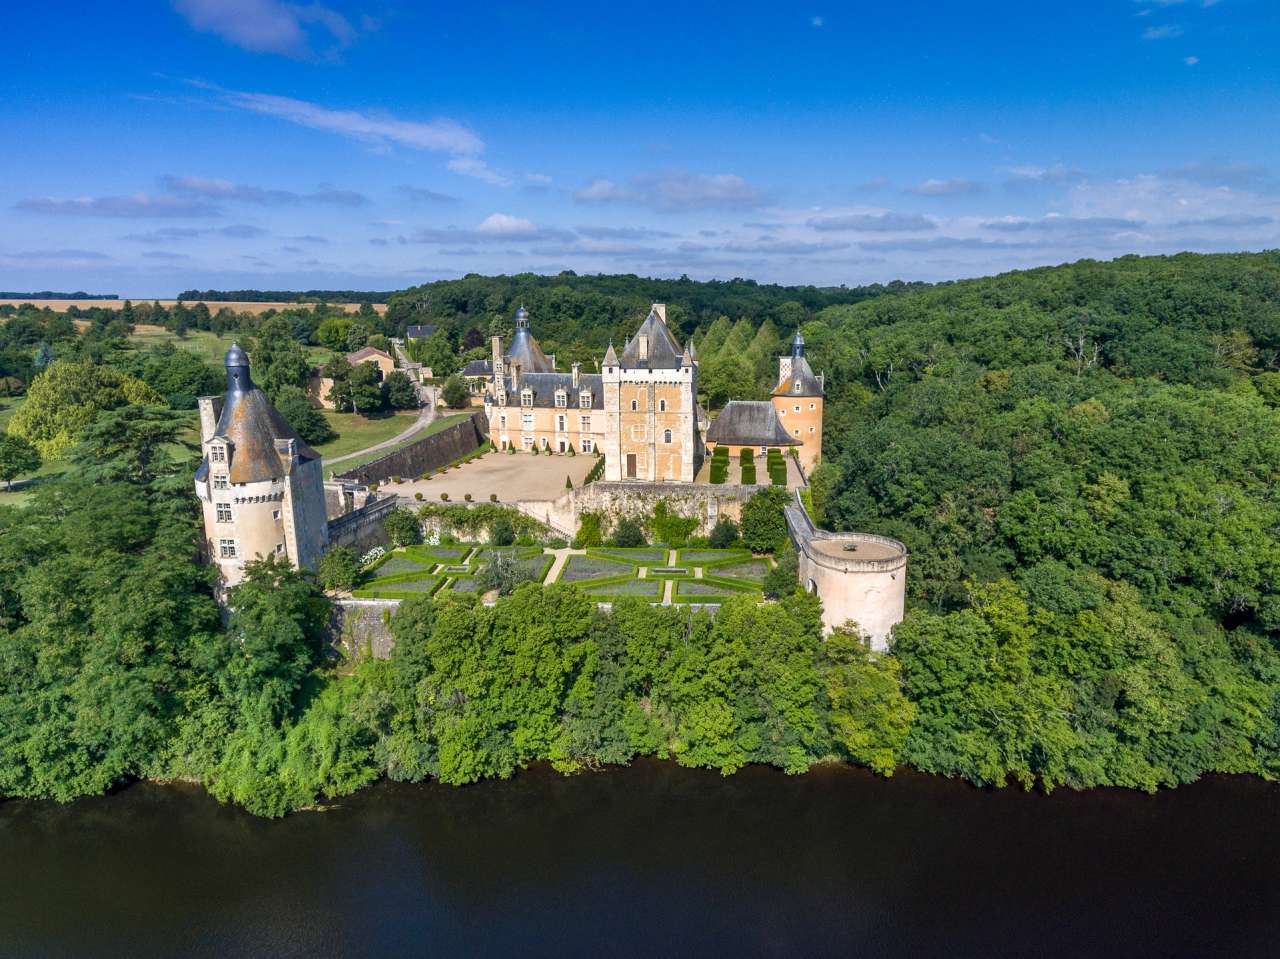 Magnificent Chateau for sale, overlooking the Vienne River.